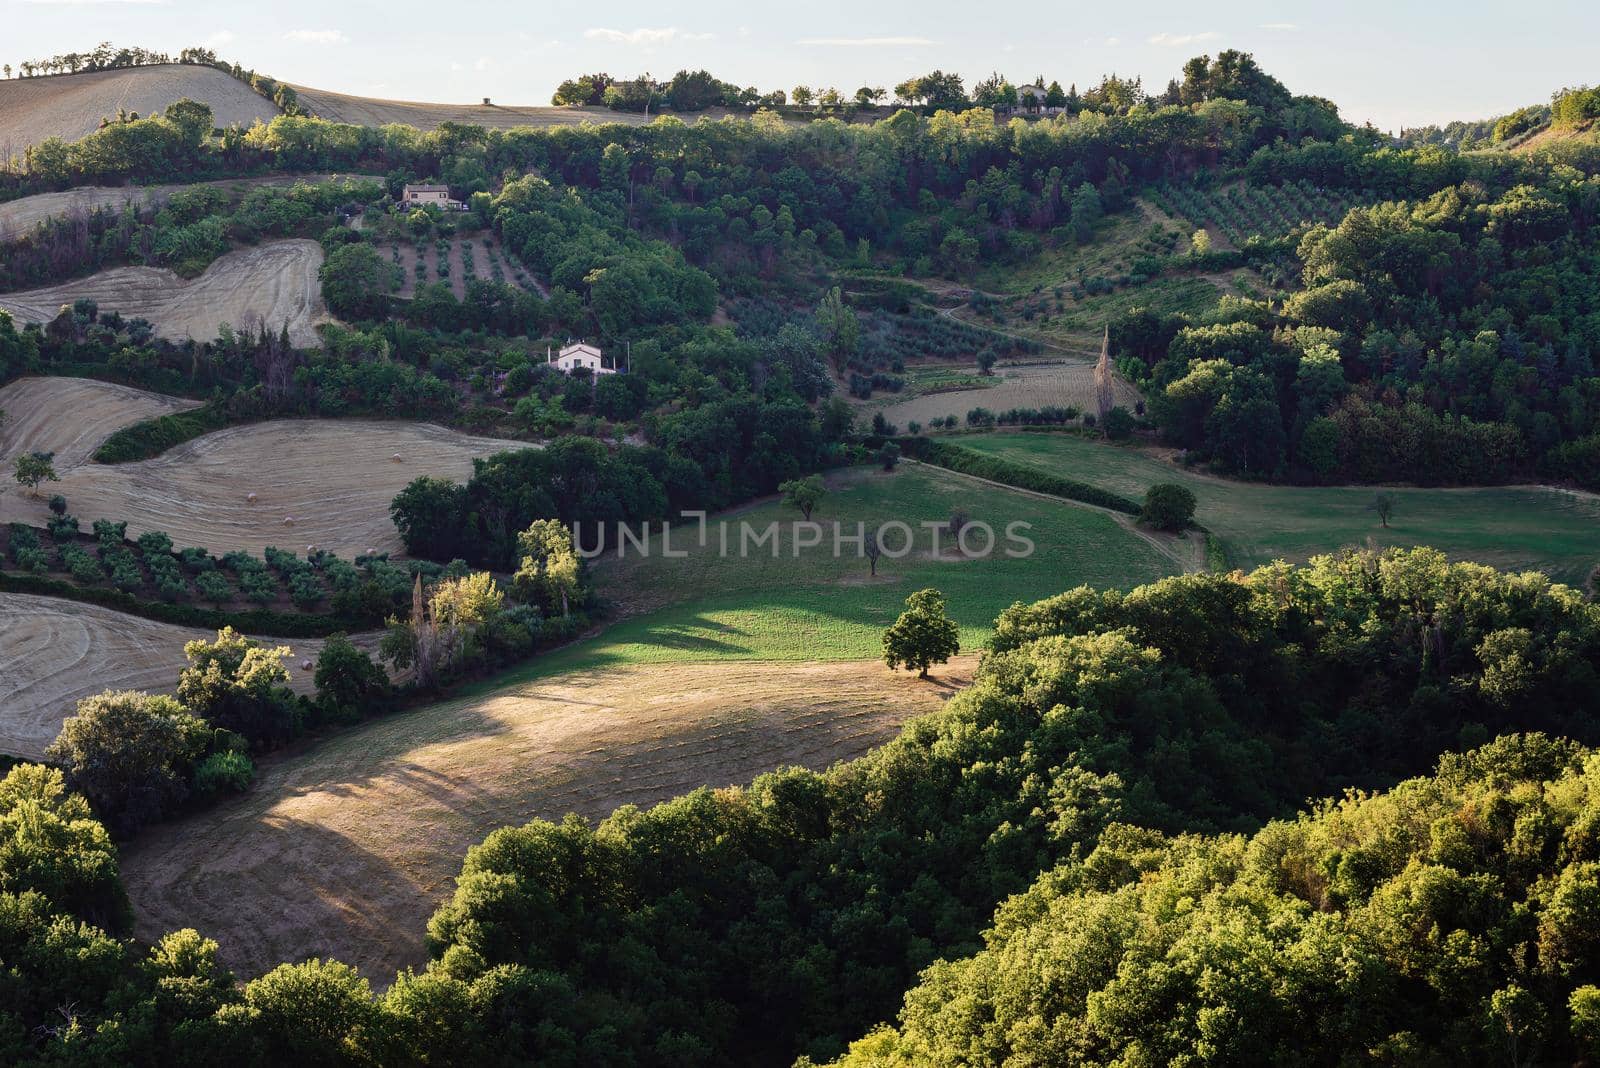 View of the fields and trees near Belvedere Fogliense in the Marche region of Italy, at evening before the sun sets.